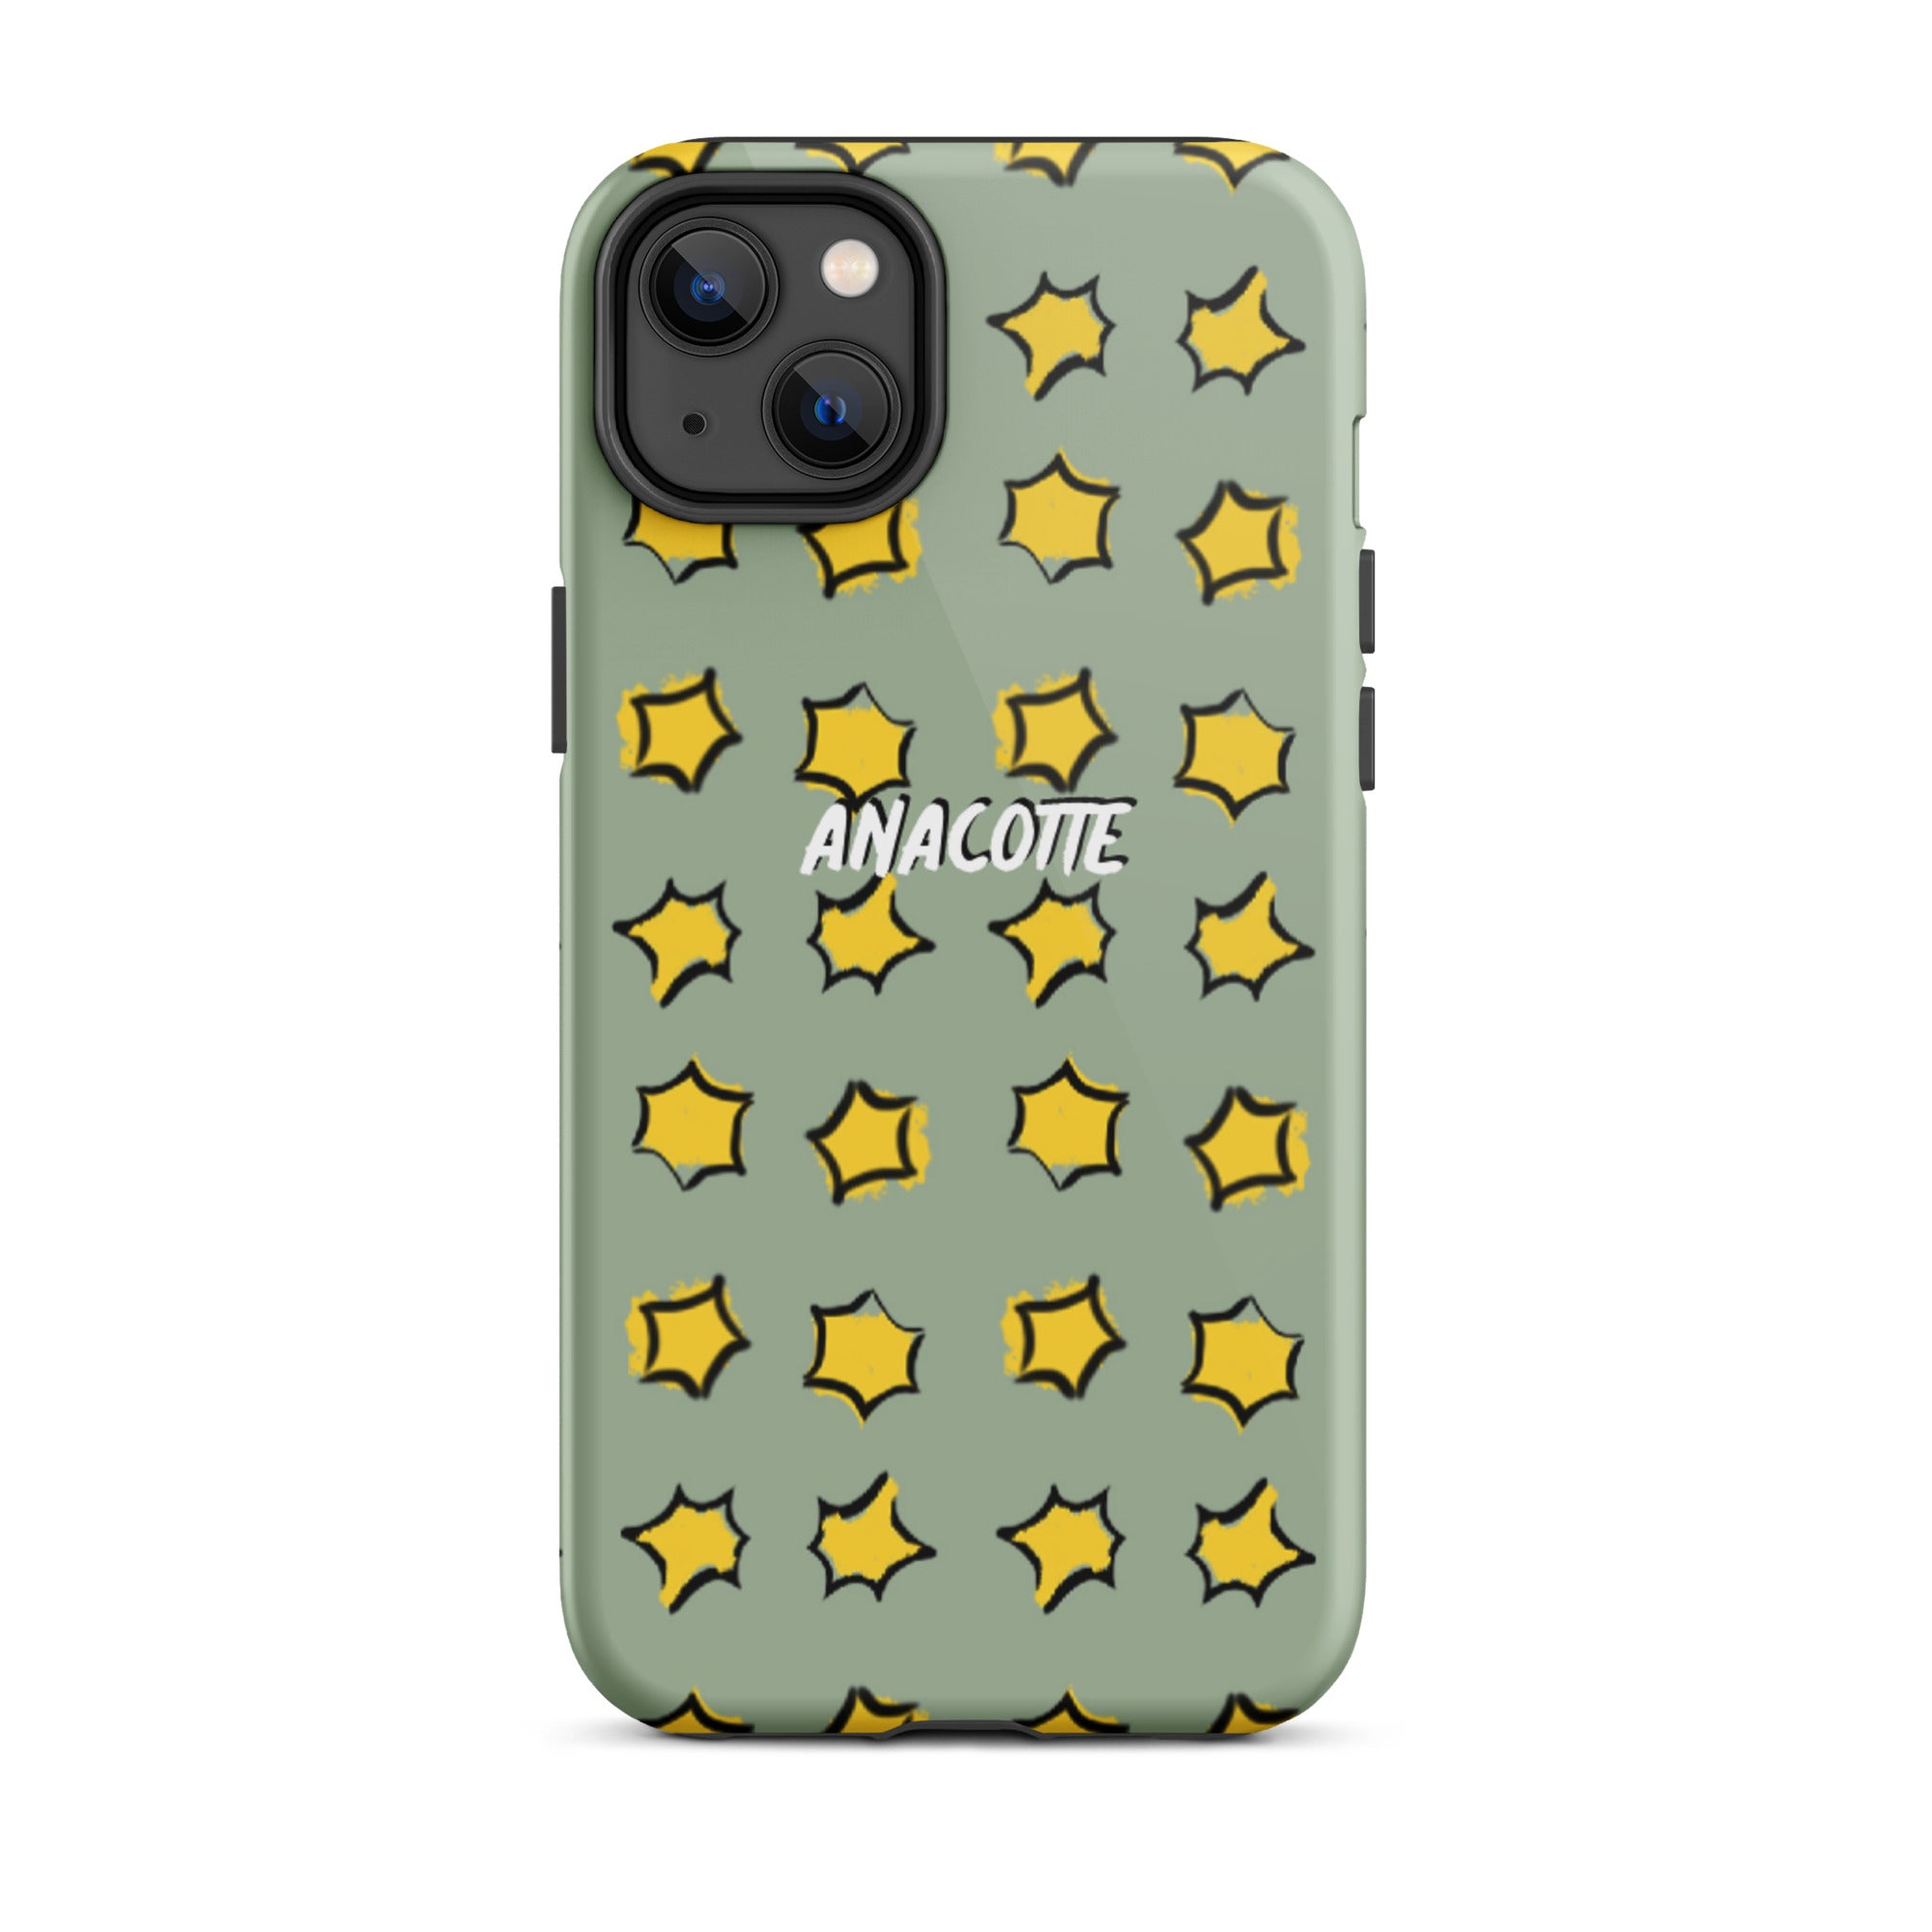 iPhone 14, 13, 12, 11 Christmas Theme iPhone Cases Star Green Anacotte